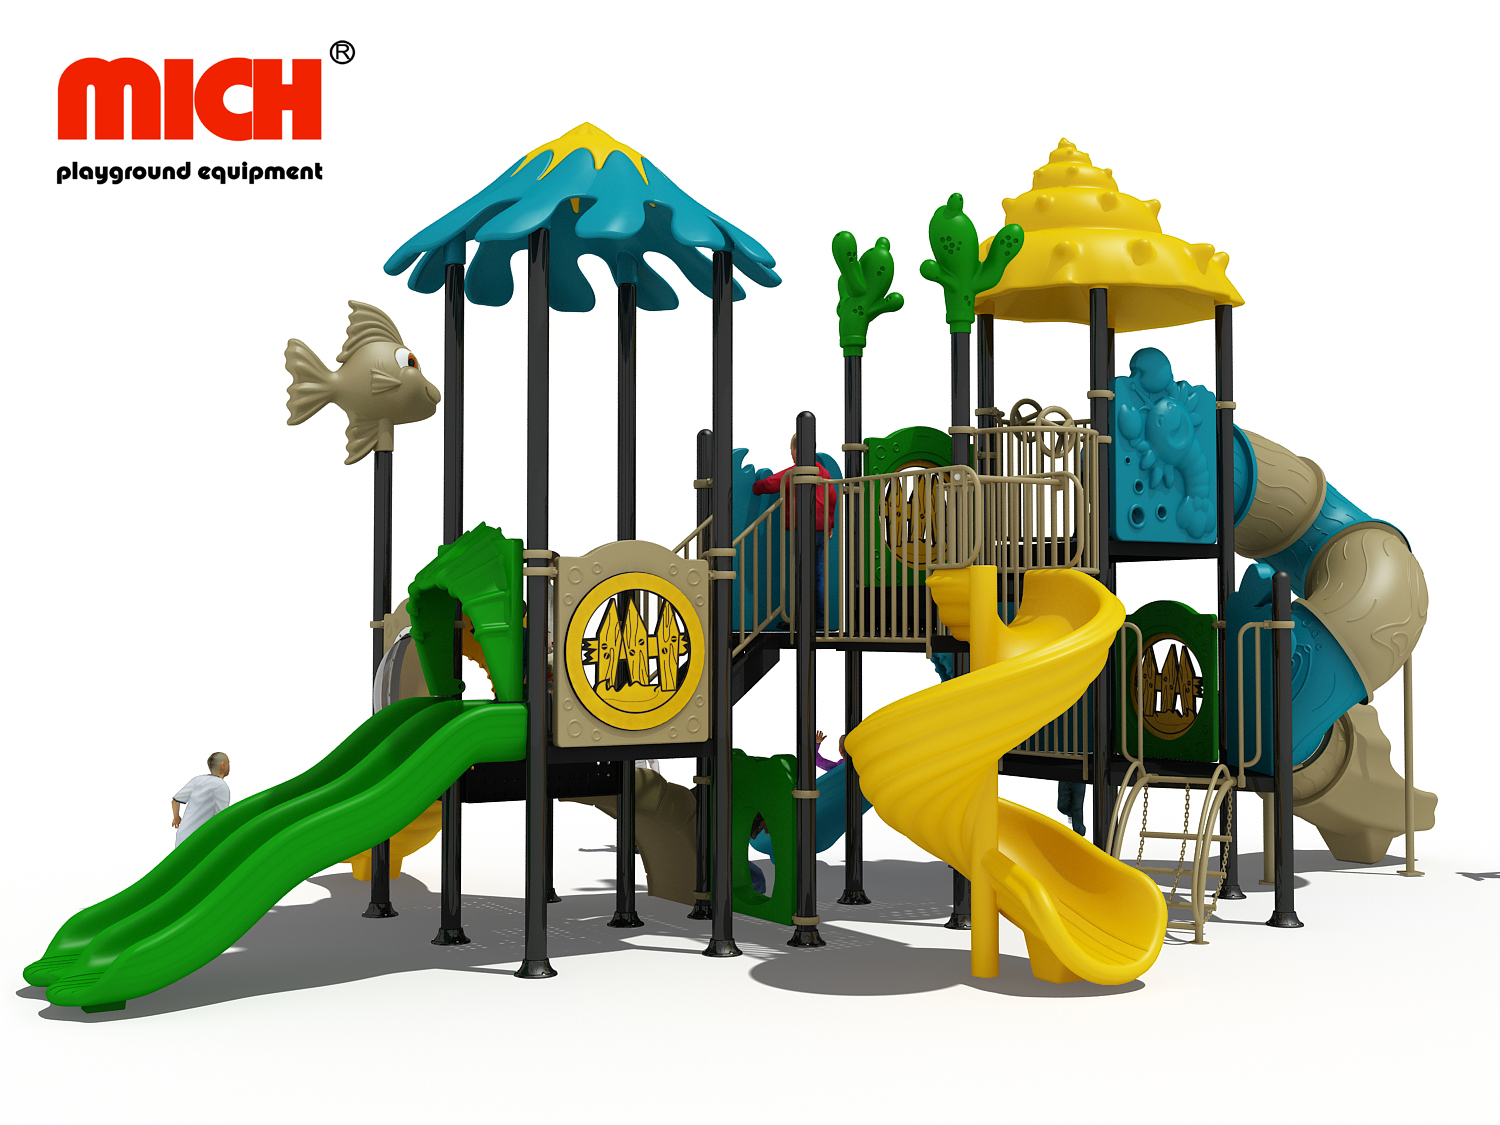 Toddler Outdoor Playground Equipment for Sale